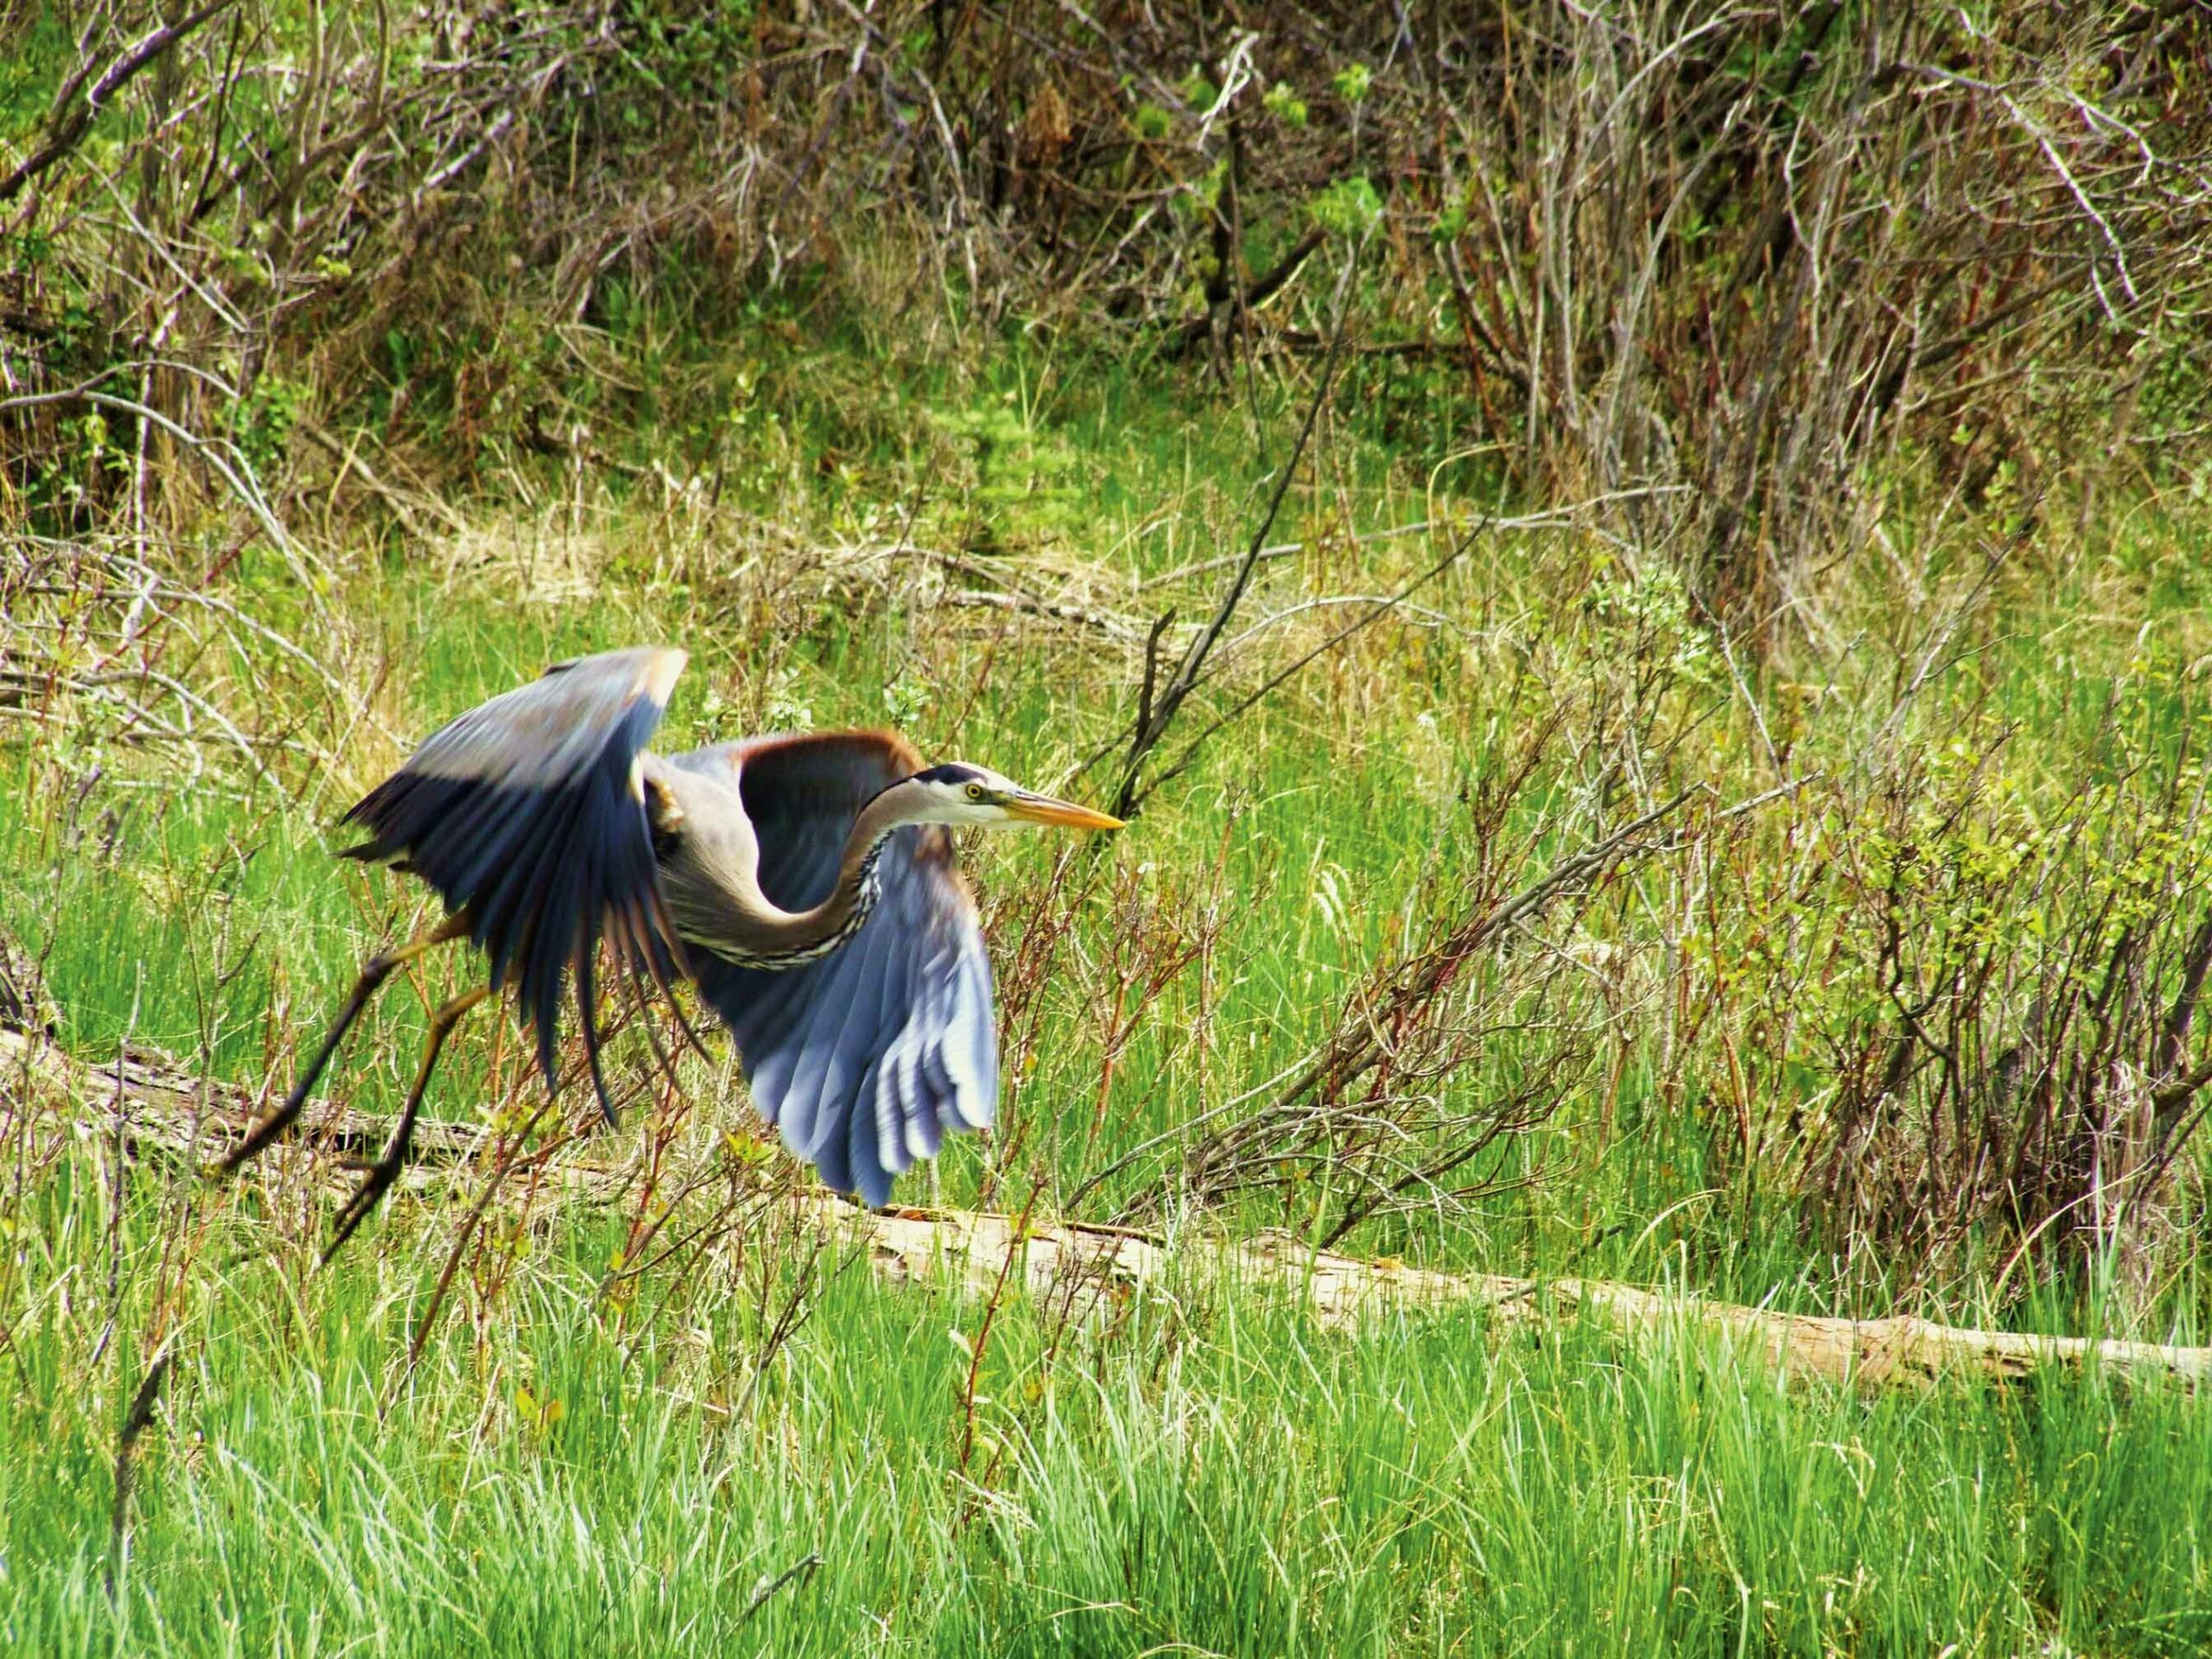 A blue heron takes off at the Inglewood Bird Sanctuary, which is a great photo op in Calgary